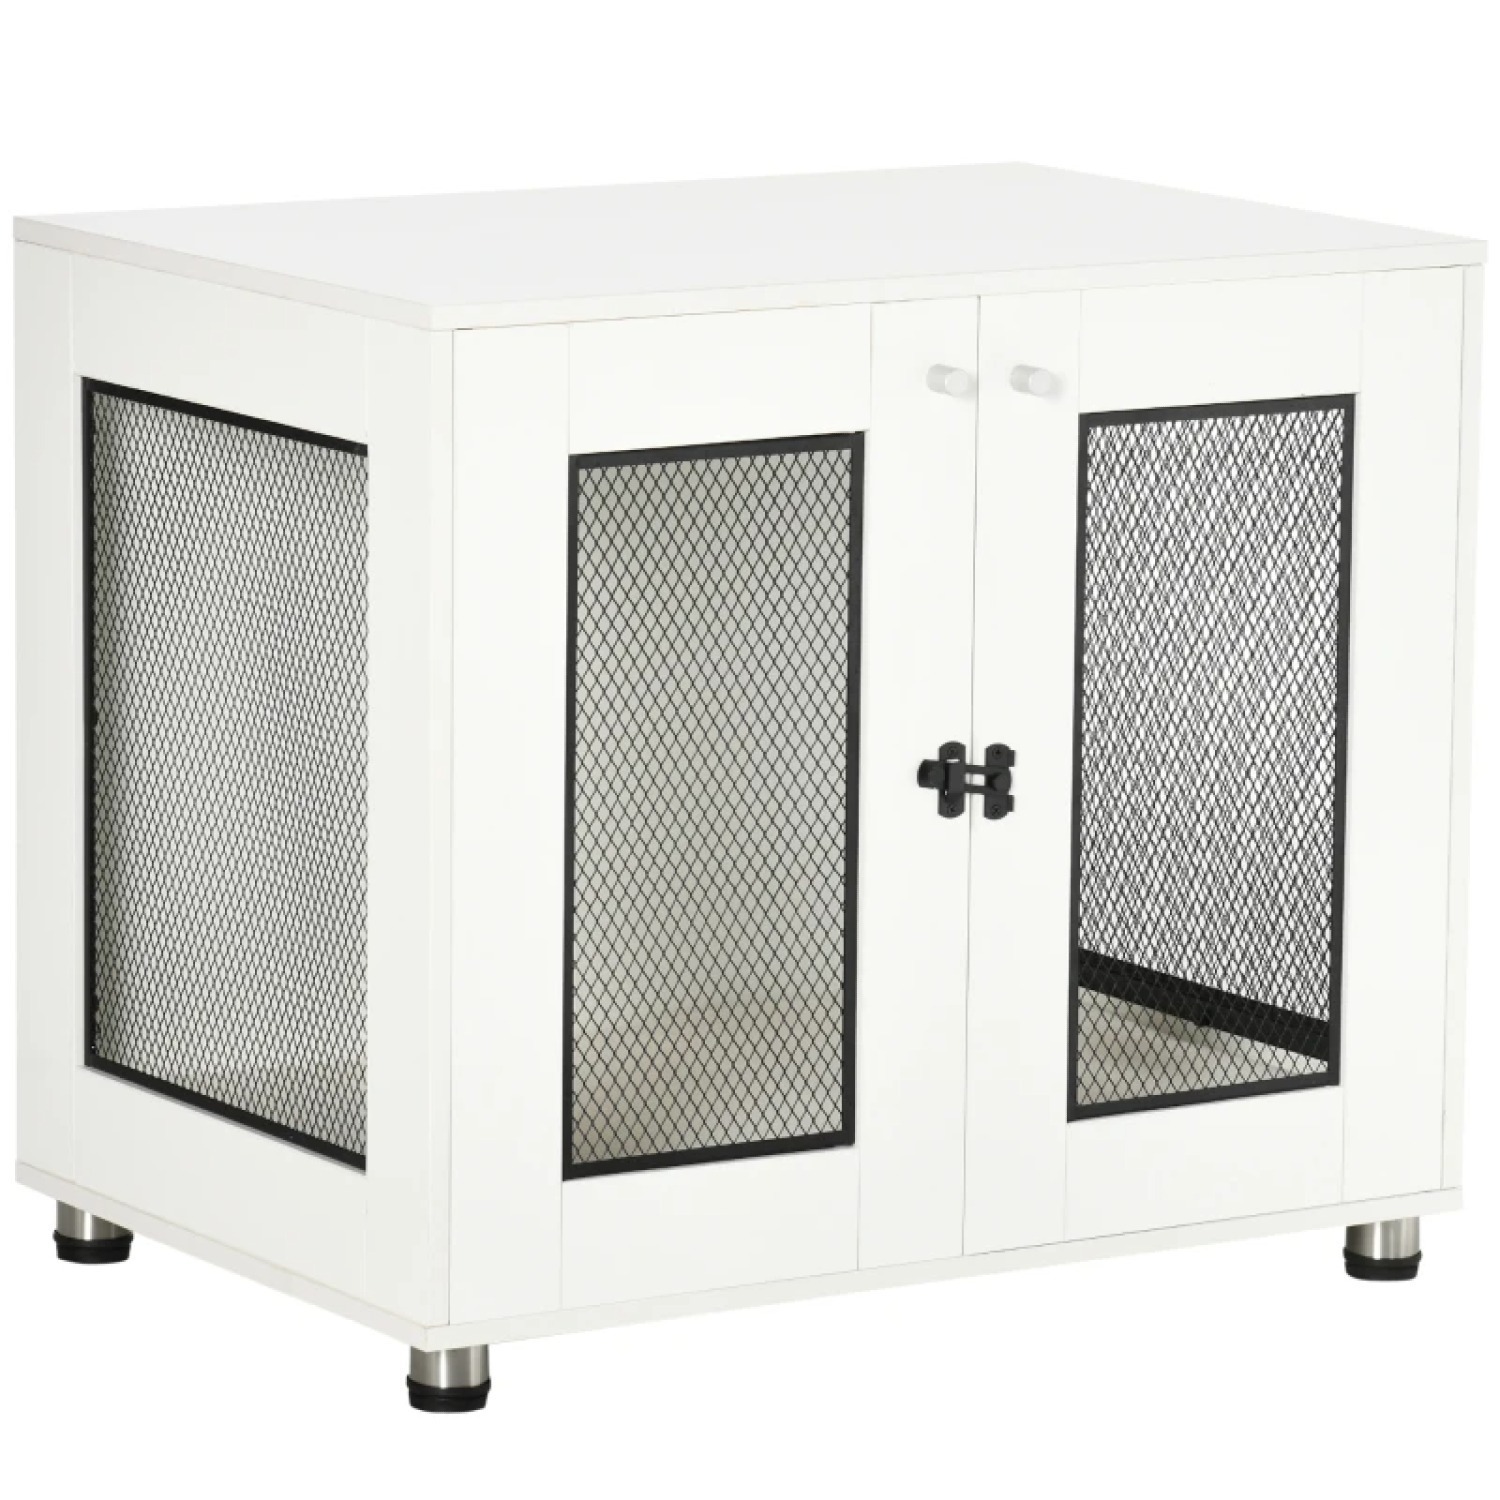 PawHut Dog Crate Furniture w/ Water resistant Cushion (White) $90 + Free Shipping